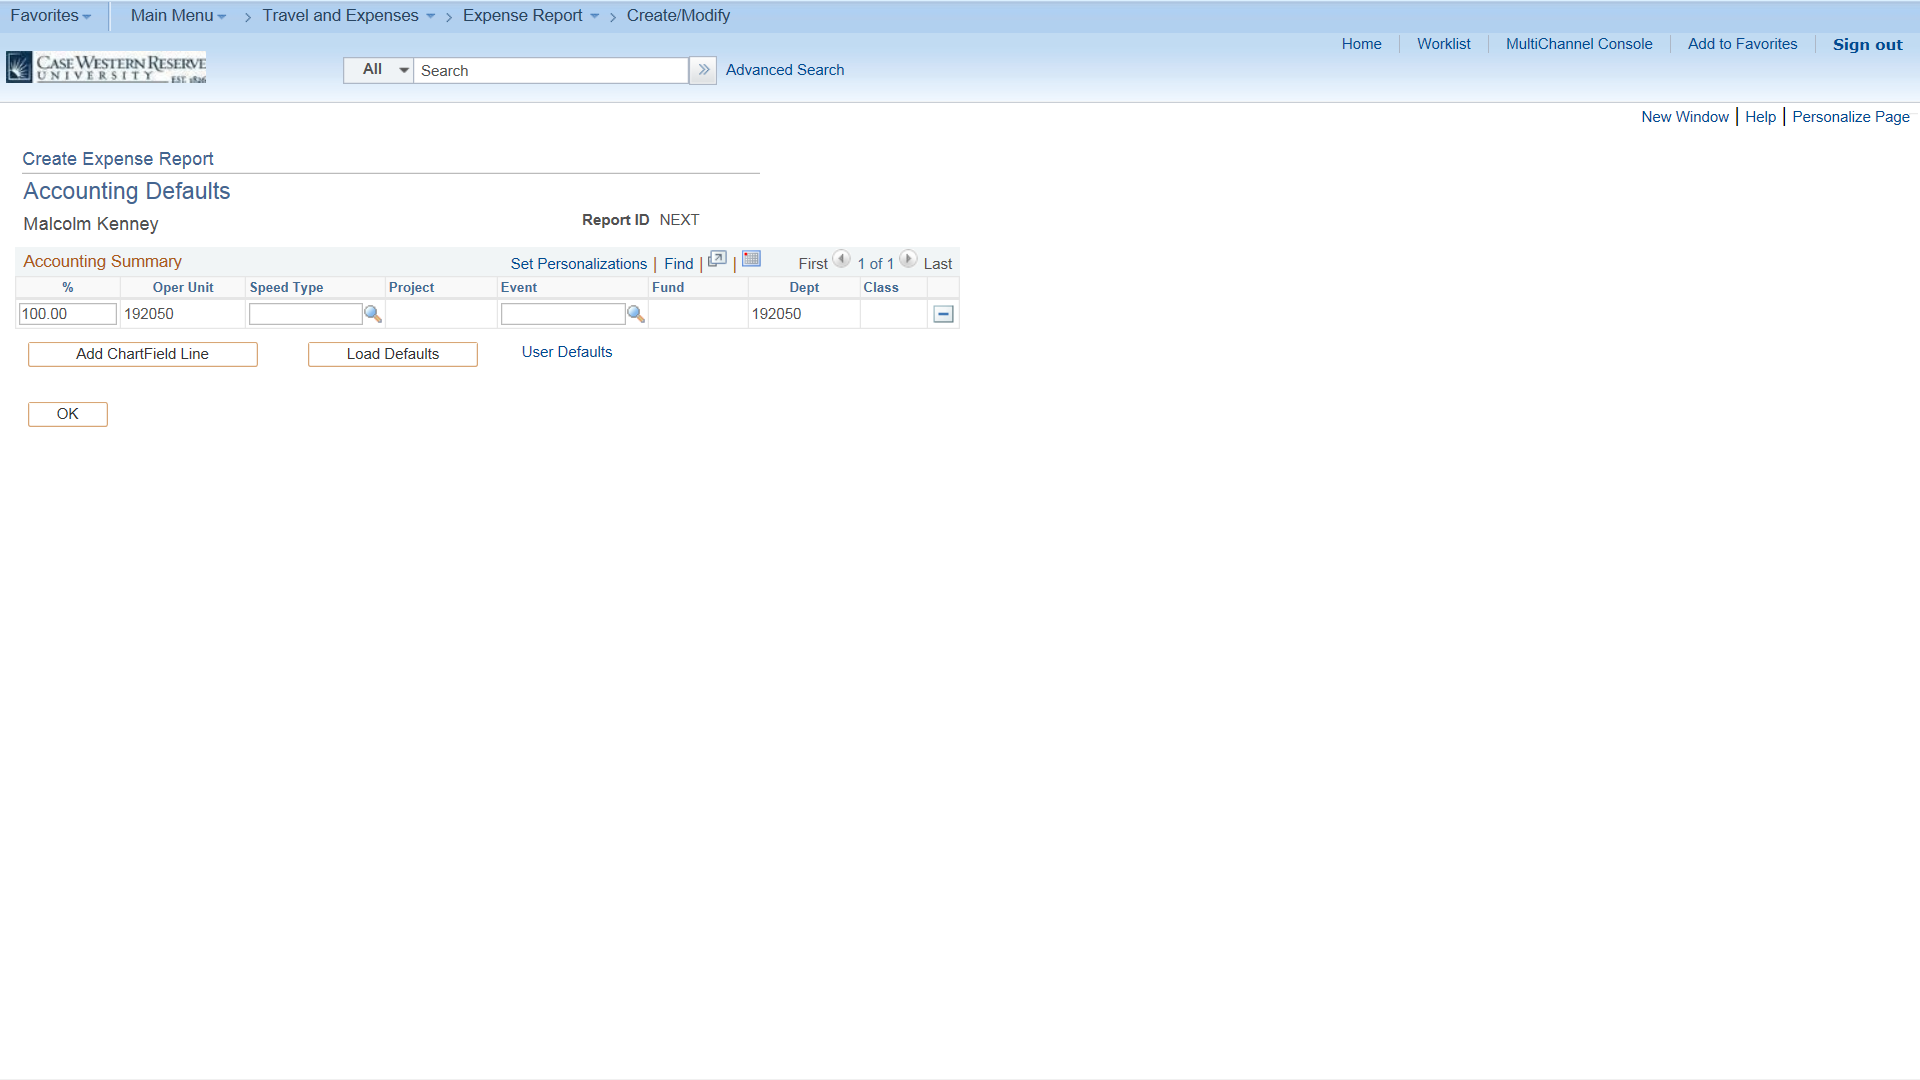 PeopleSoft Financials screen shot displaying the Account Defaults form